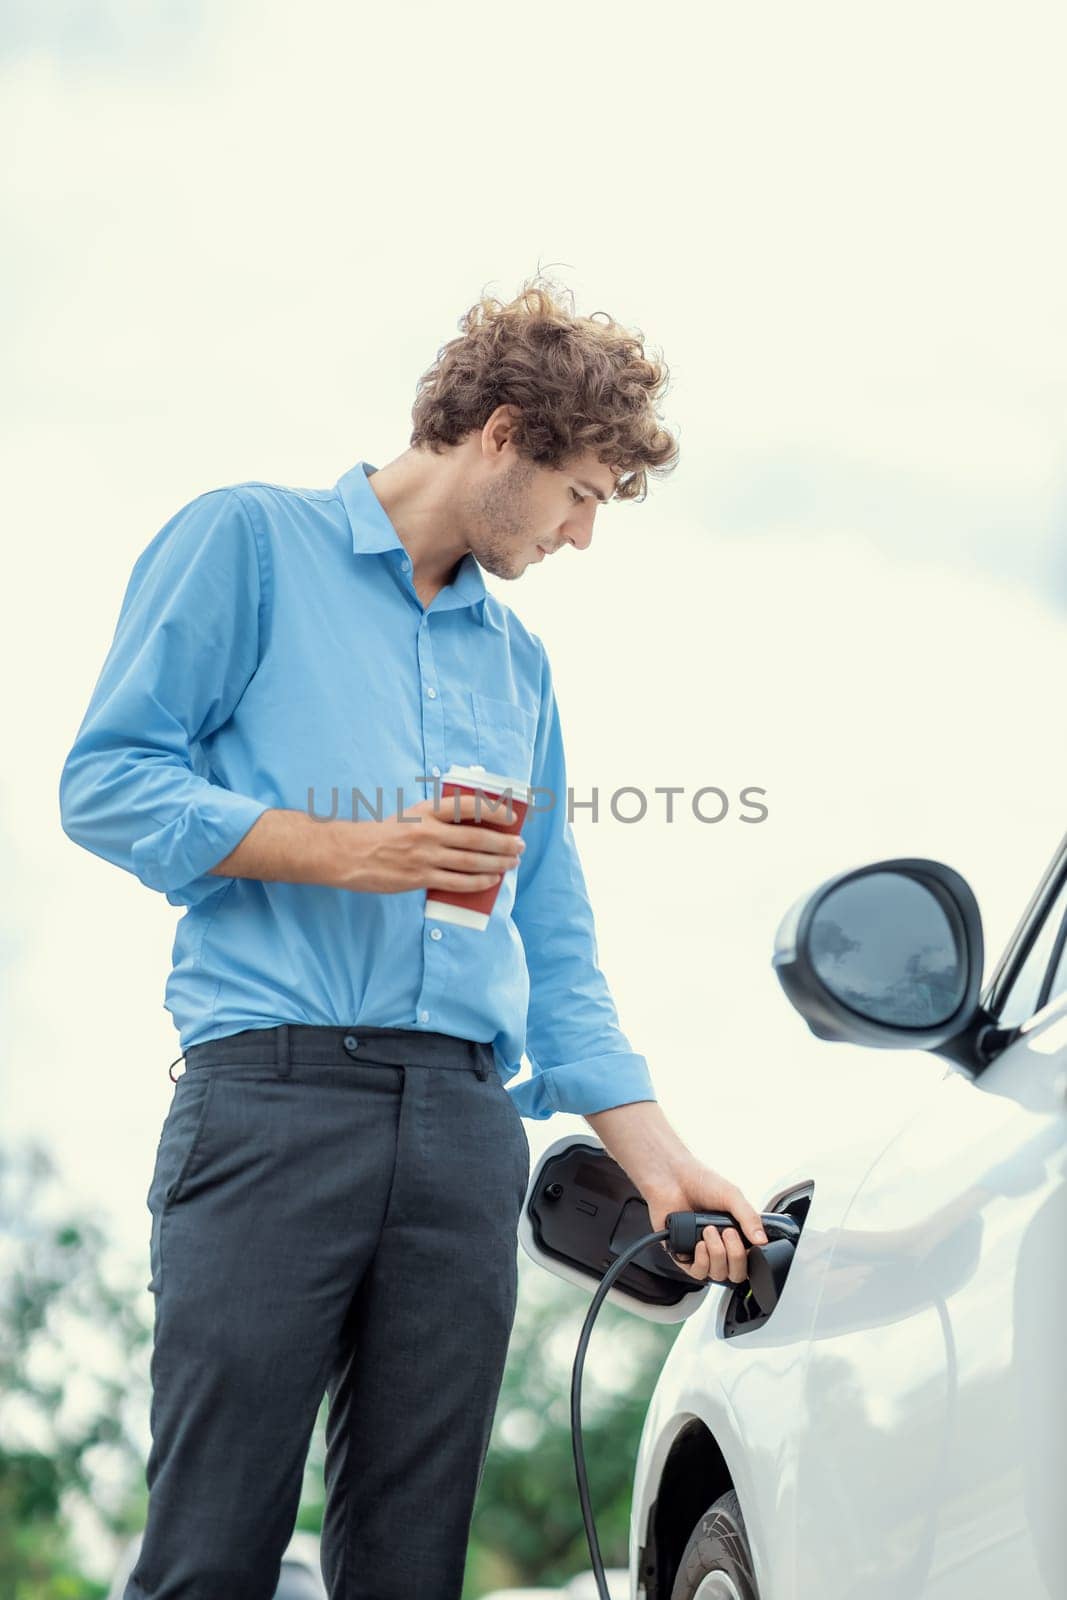 Progressive eco-friendly concept of parking EV car at public electric-powered charging station in city with blur background of businessman leaning on recharging-electric vehicle with coffee.